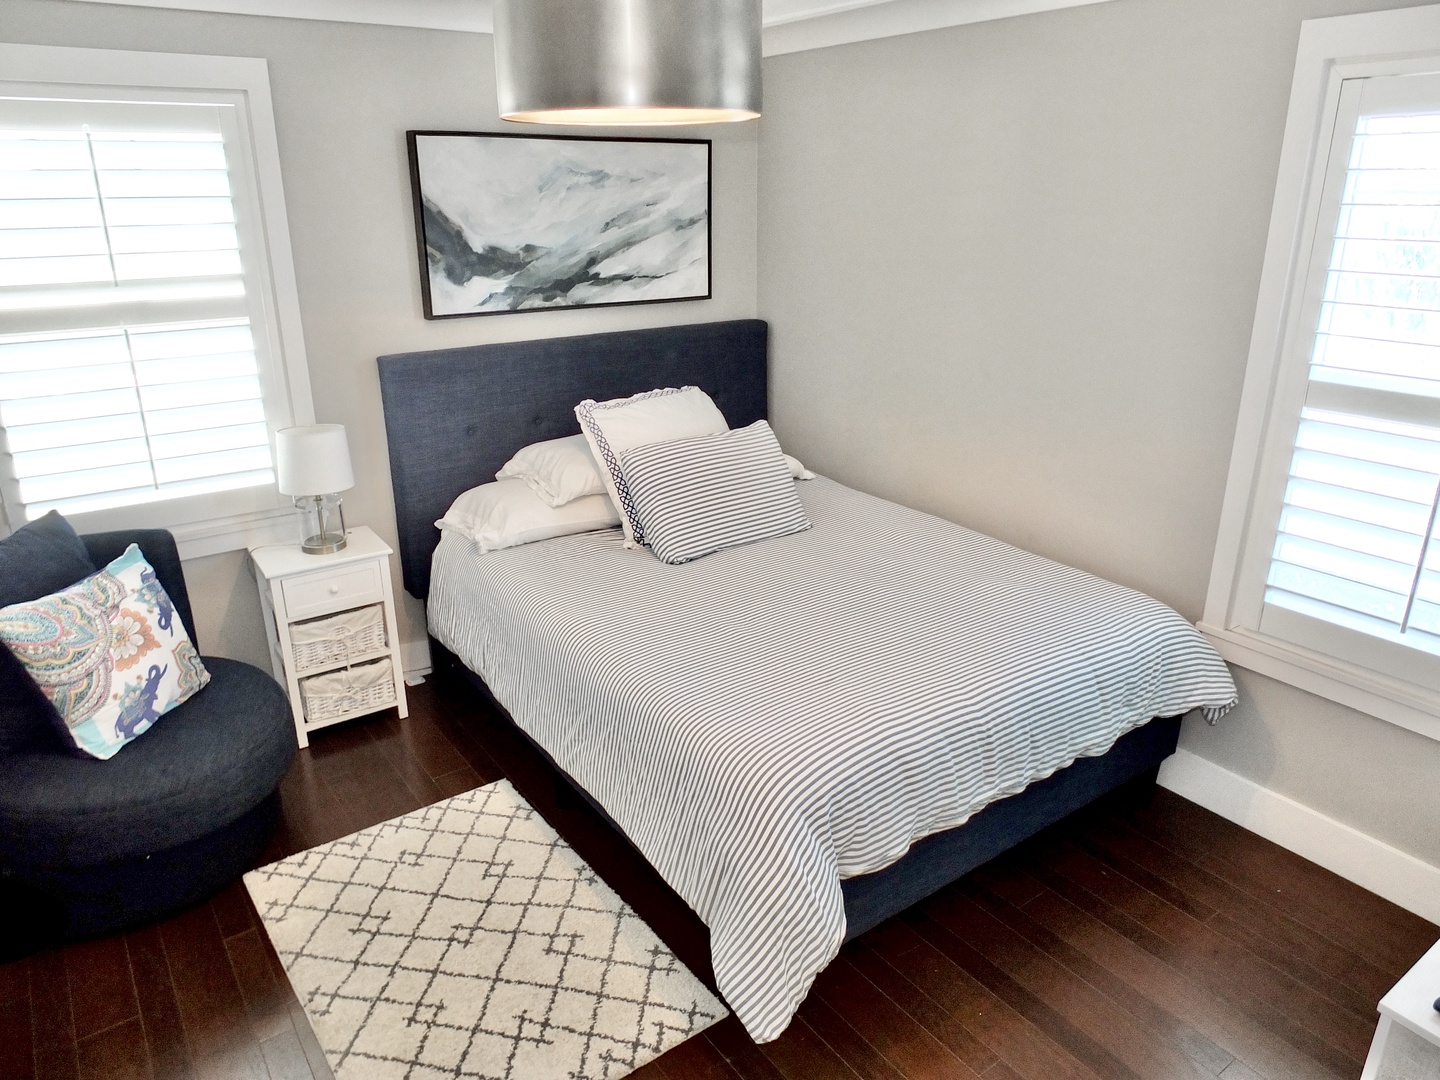 Relax in the second bedroom, containing a full bed and smart tv